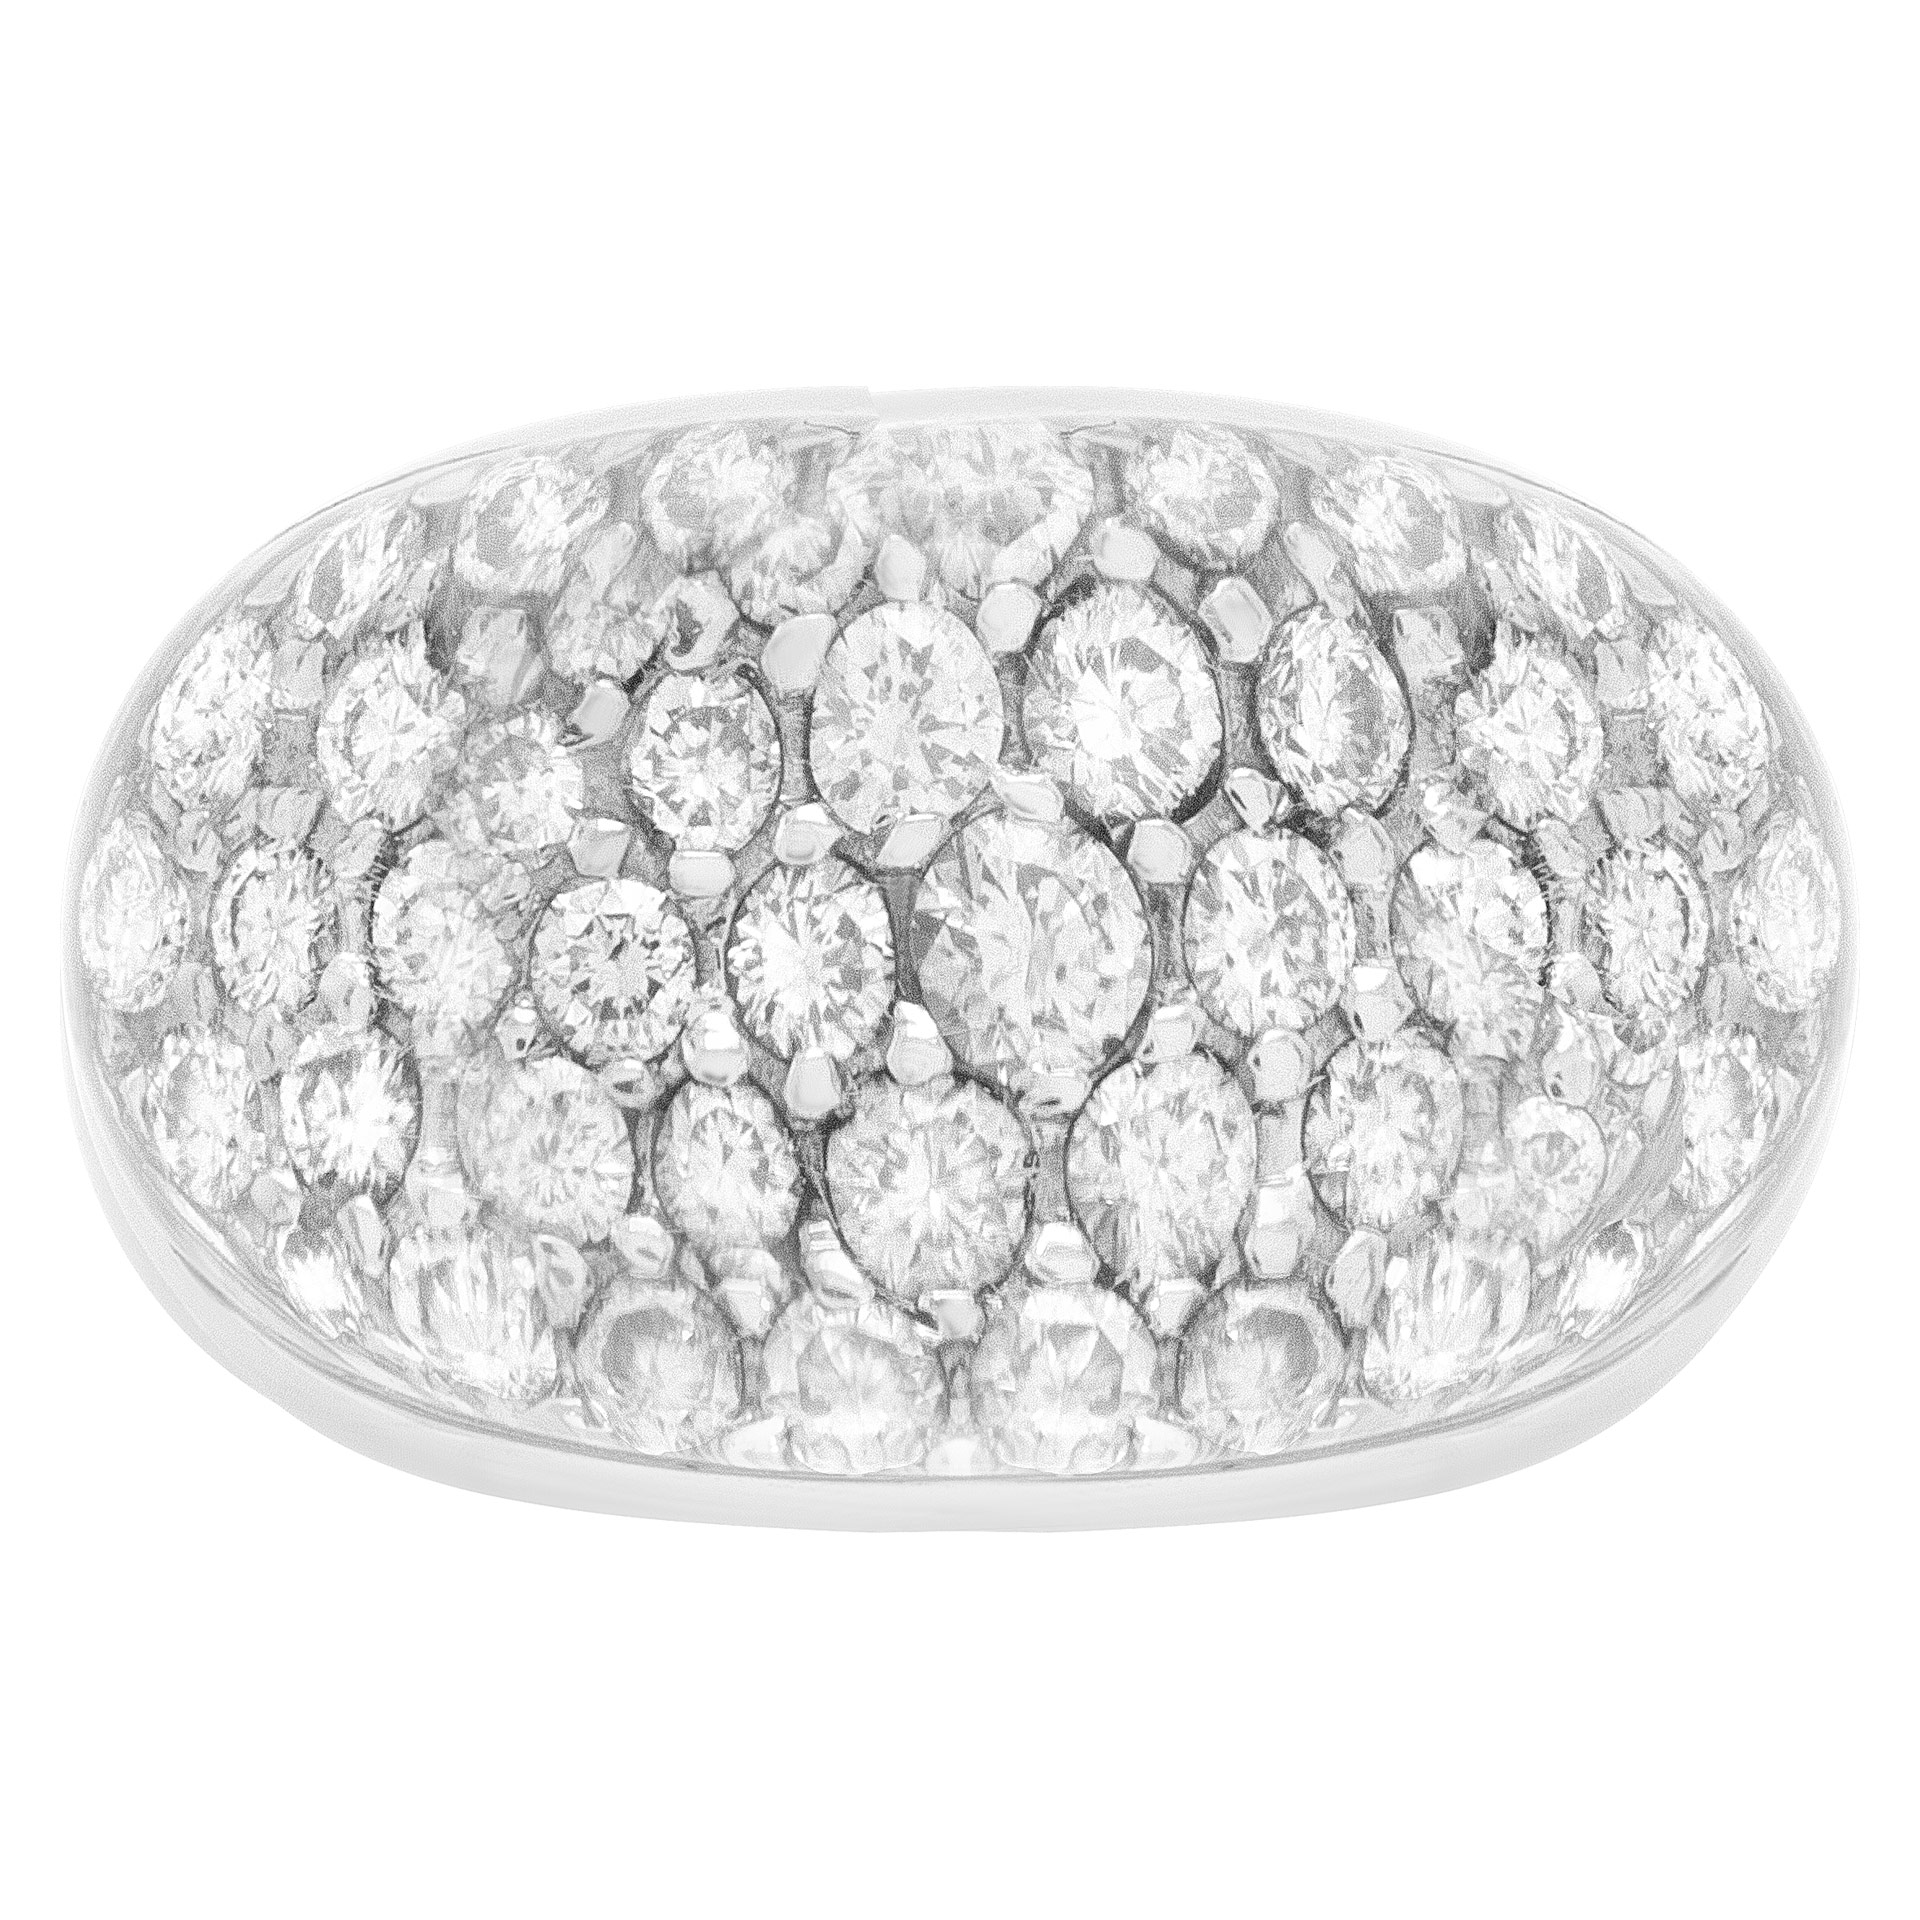 18k white gold pave diamonds & crystal dome ring image 1